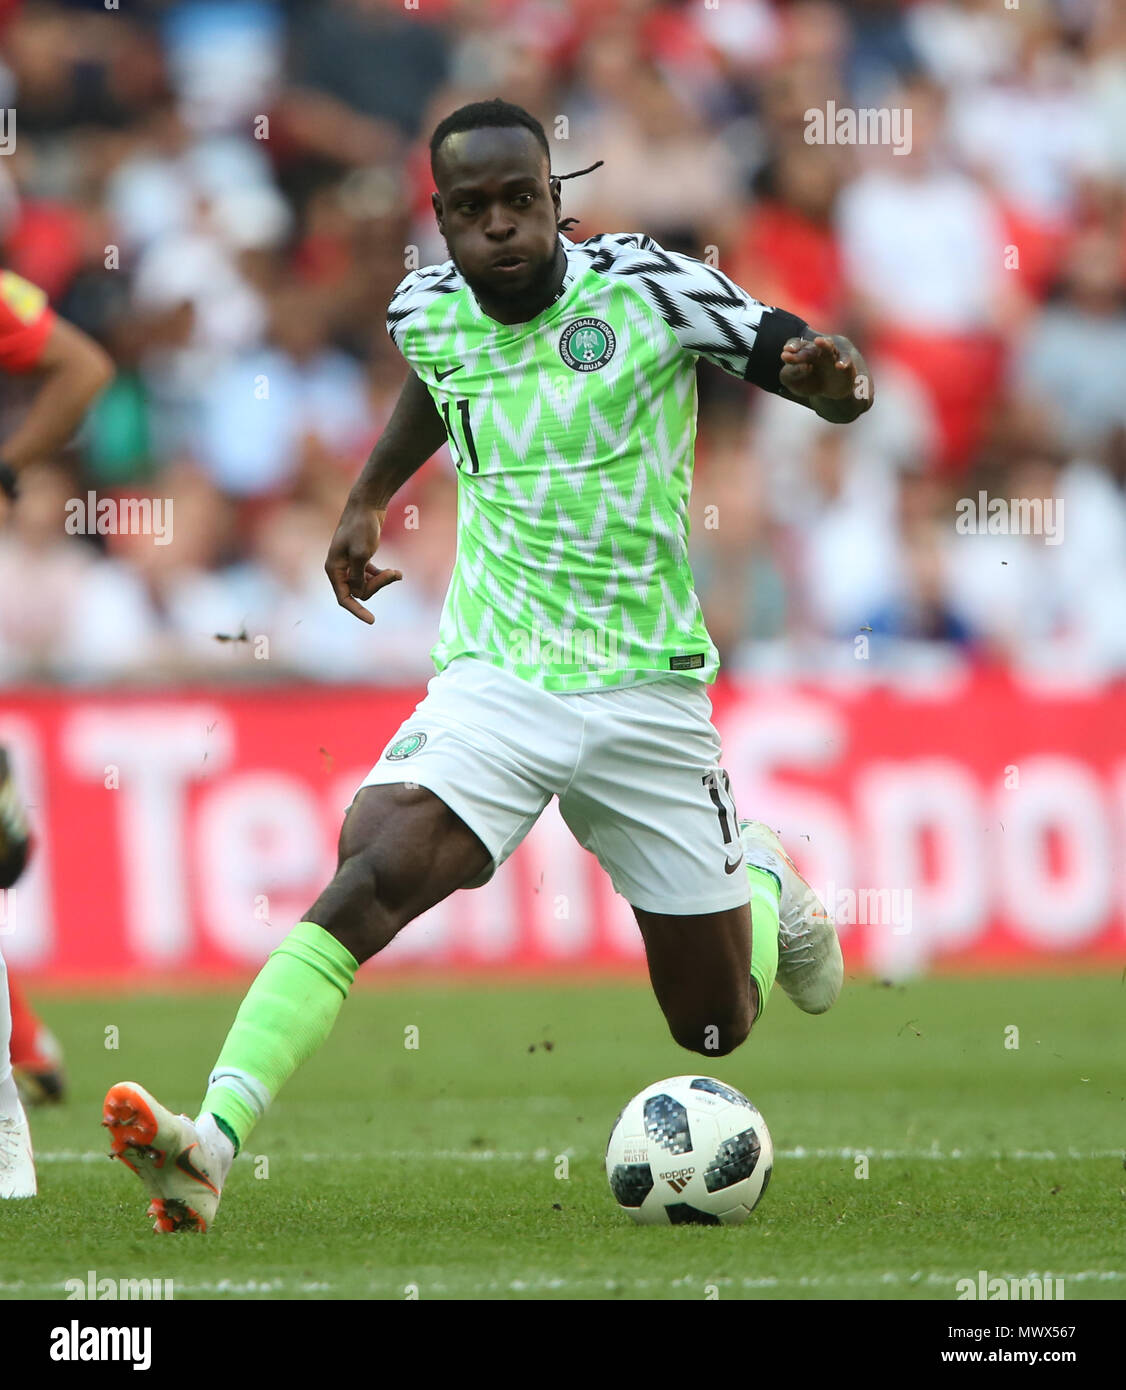 VICTOR MOSES NIGERIA ENGLAND V NIGERIA 02 June 2018 GBB7698 STRICTLY EDITORIAL USE ONLY. If The Player/Players Depicted In This Image Is/Are Playing For An English Club Or The England National Team. Then This Image May Only Be Used For Editorial Purposes. No Commercial Use. The Following Usages Are Also Restricted EVEN IF IN AN EDITORIAL CONTEXT: Use in conjuction with, or part of, any unauthorized audio, video, data, fixture lists, club/league logos, Betting, Games or any 'live' services. Also Restricted Are Usages In Publications Involving A Single Player Or One Club Or Stock Photo